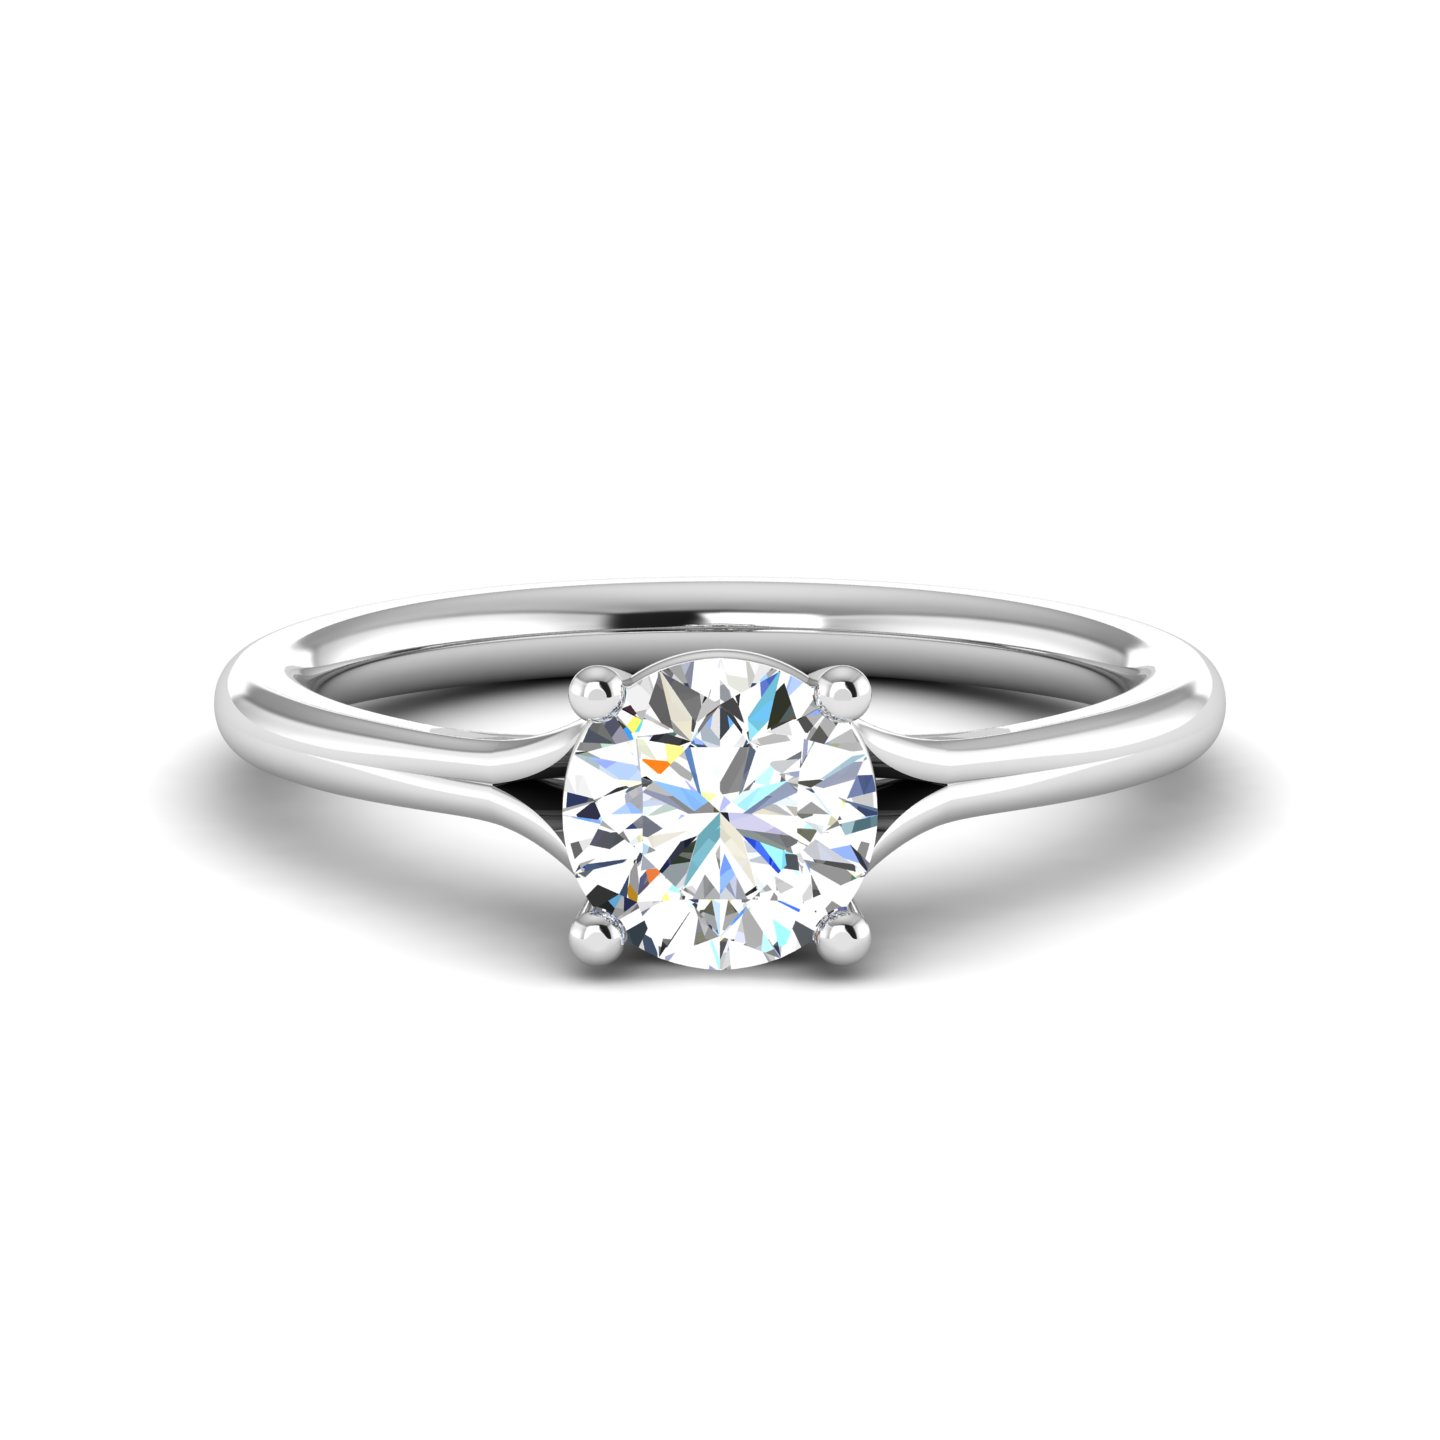 Korman Signature Isabella 4 prong Solitaire Semi Mount Engagement Ring with Split Shank